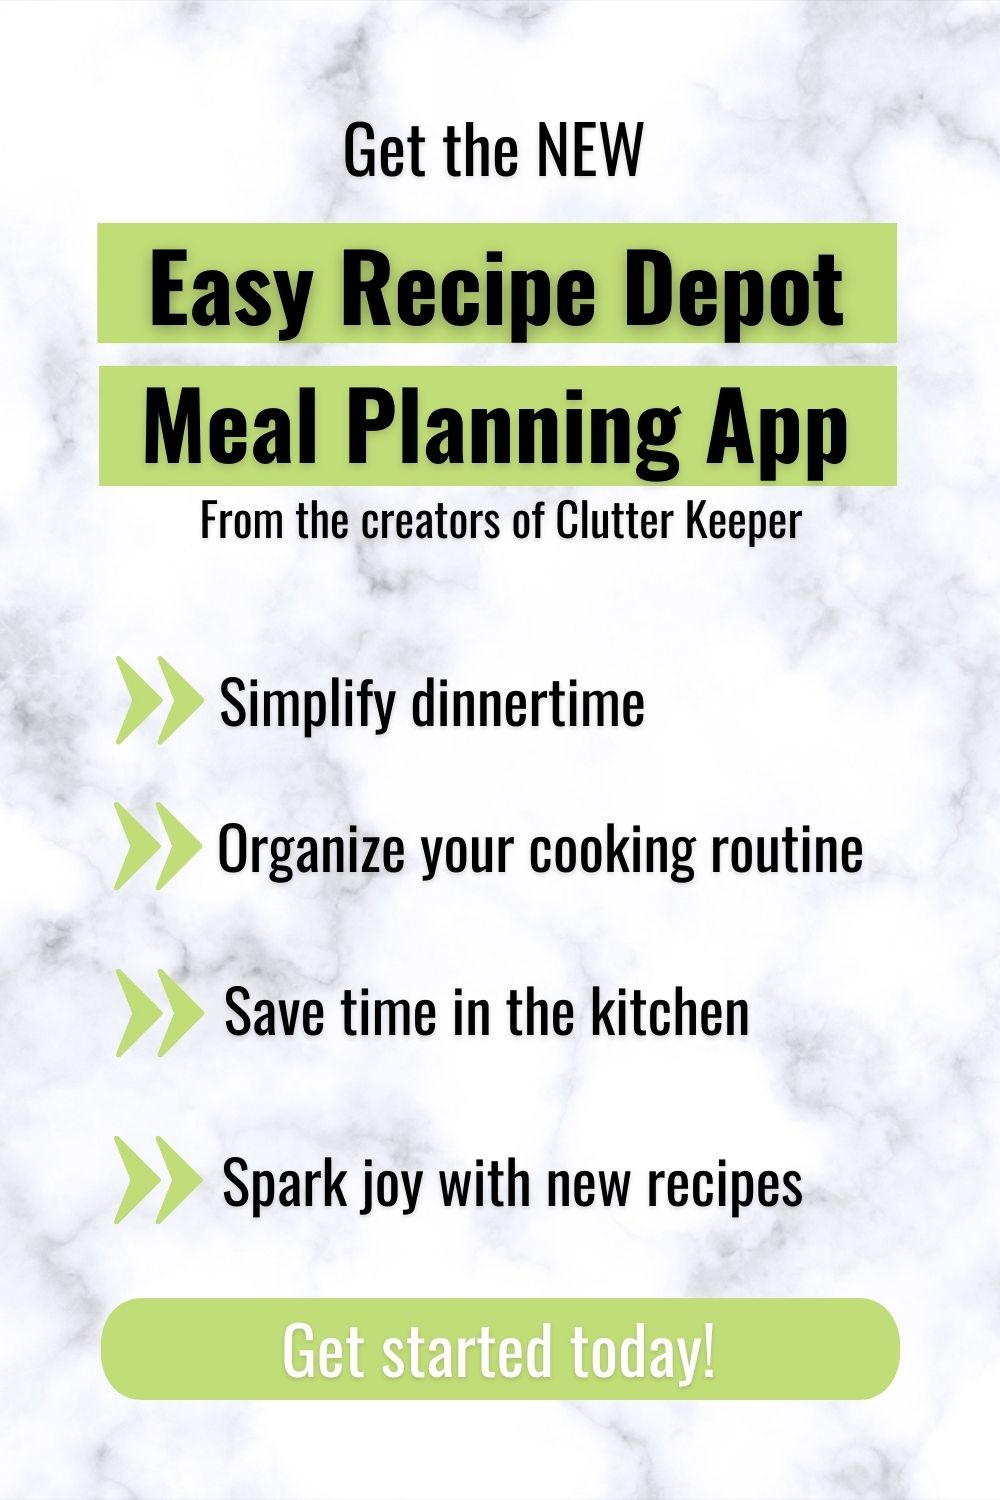 Get the new Easy Recipe Depot meal planning app from the creators of Clutter Keeper.